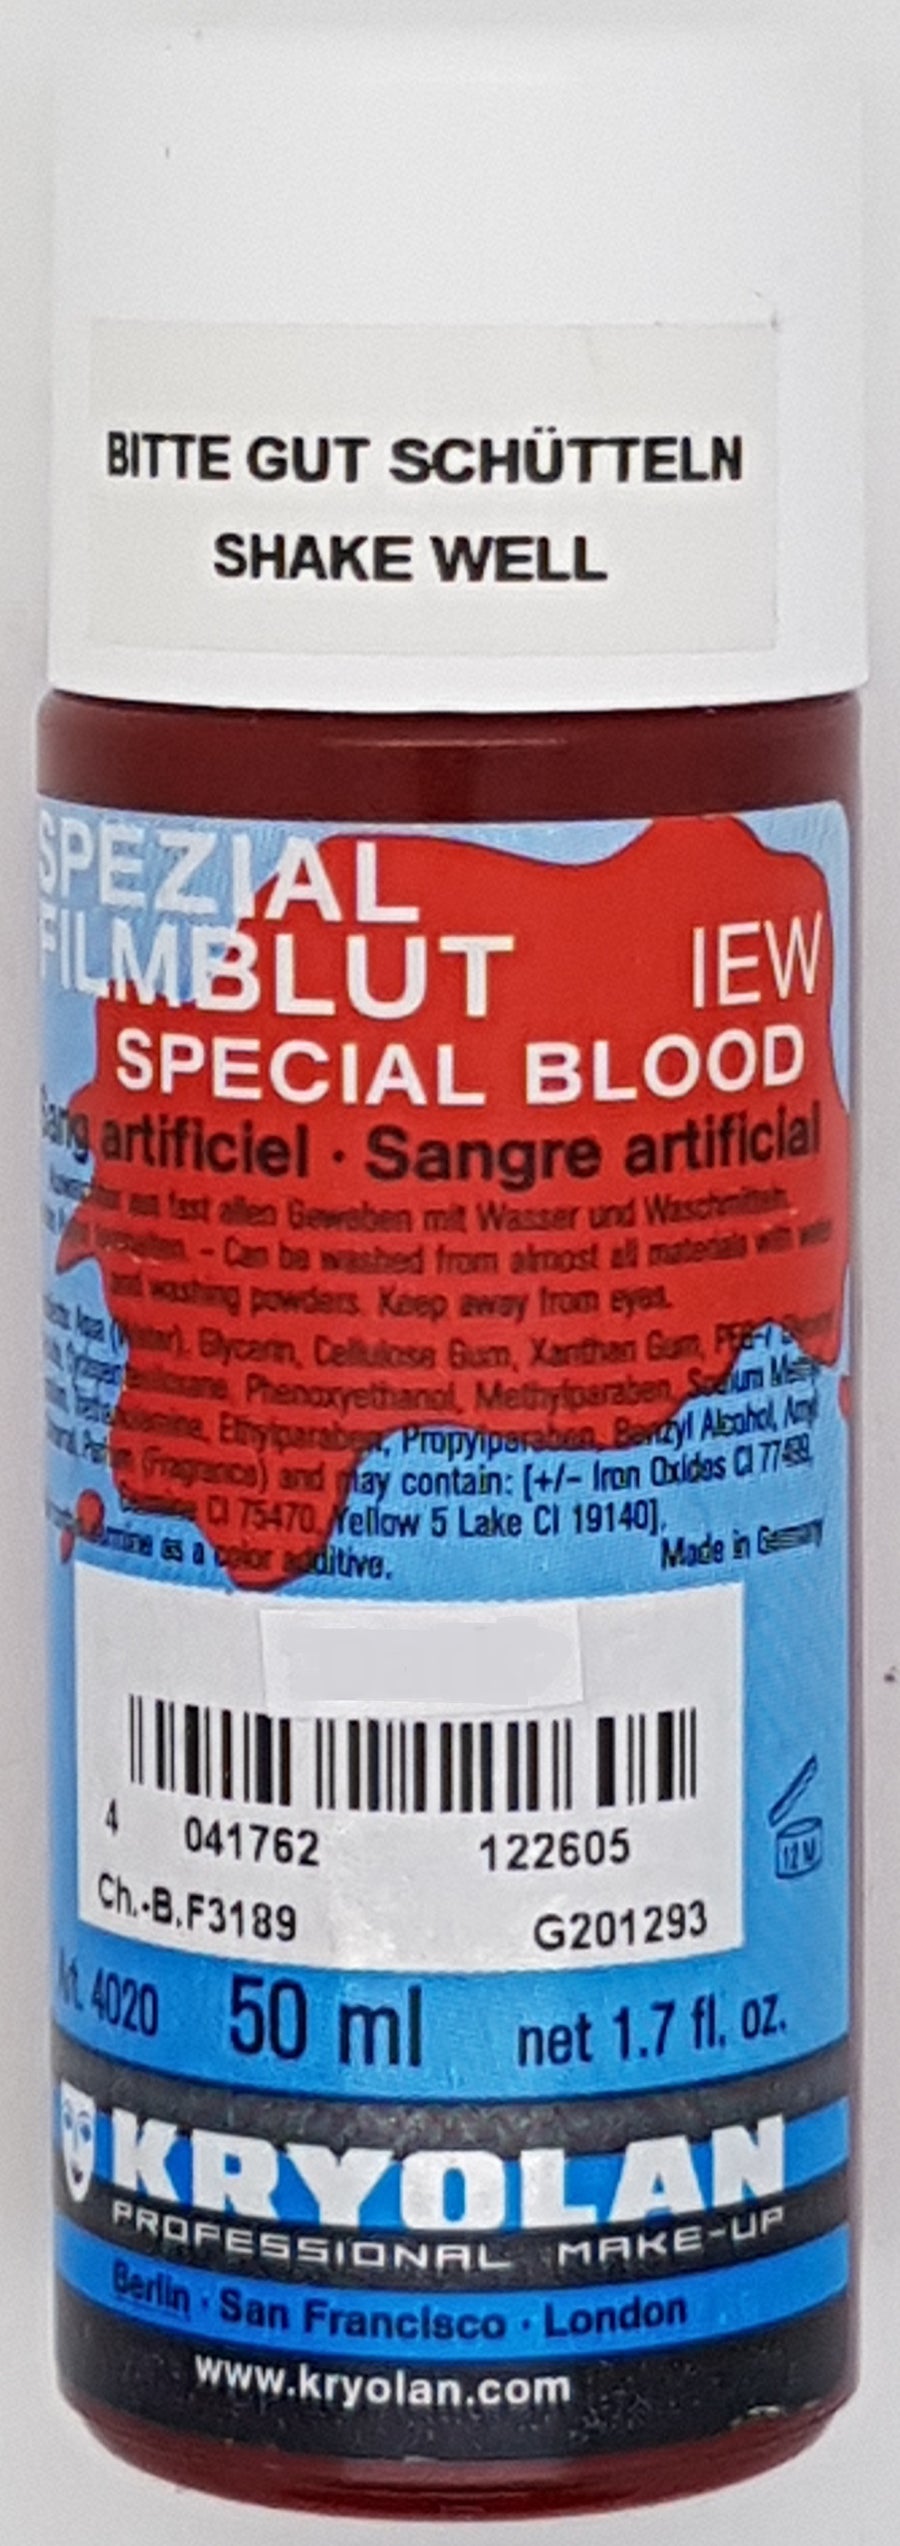 Kryolan Special Blood IEW Professional Stage blood SFX & Casualty Simulation